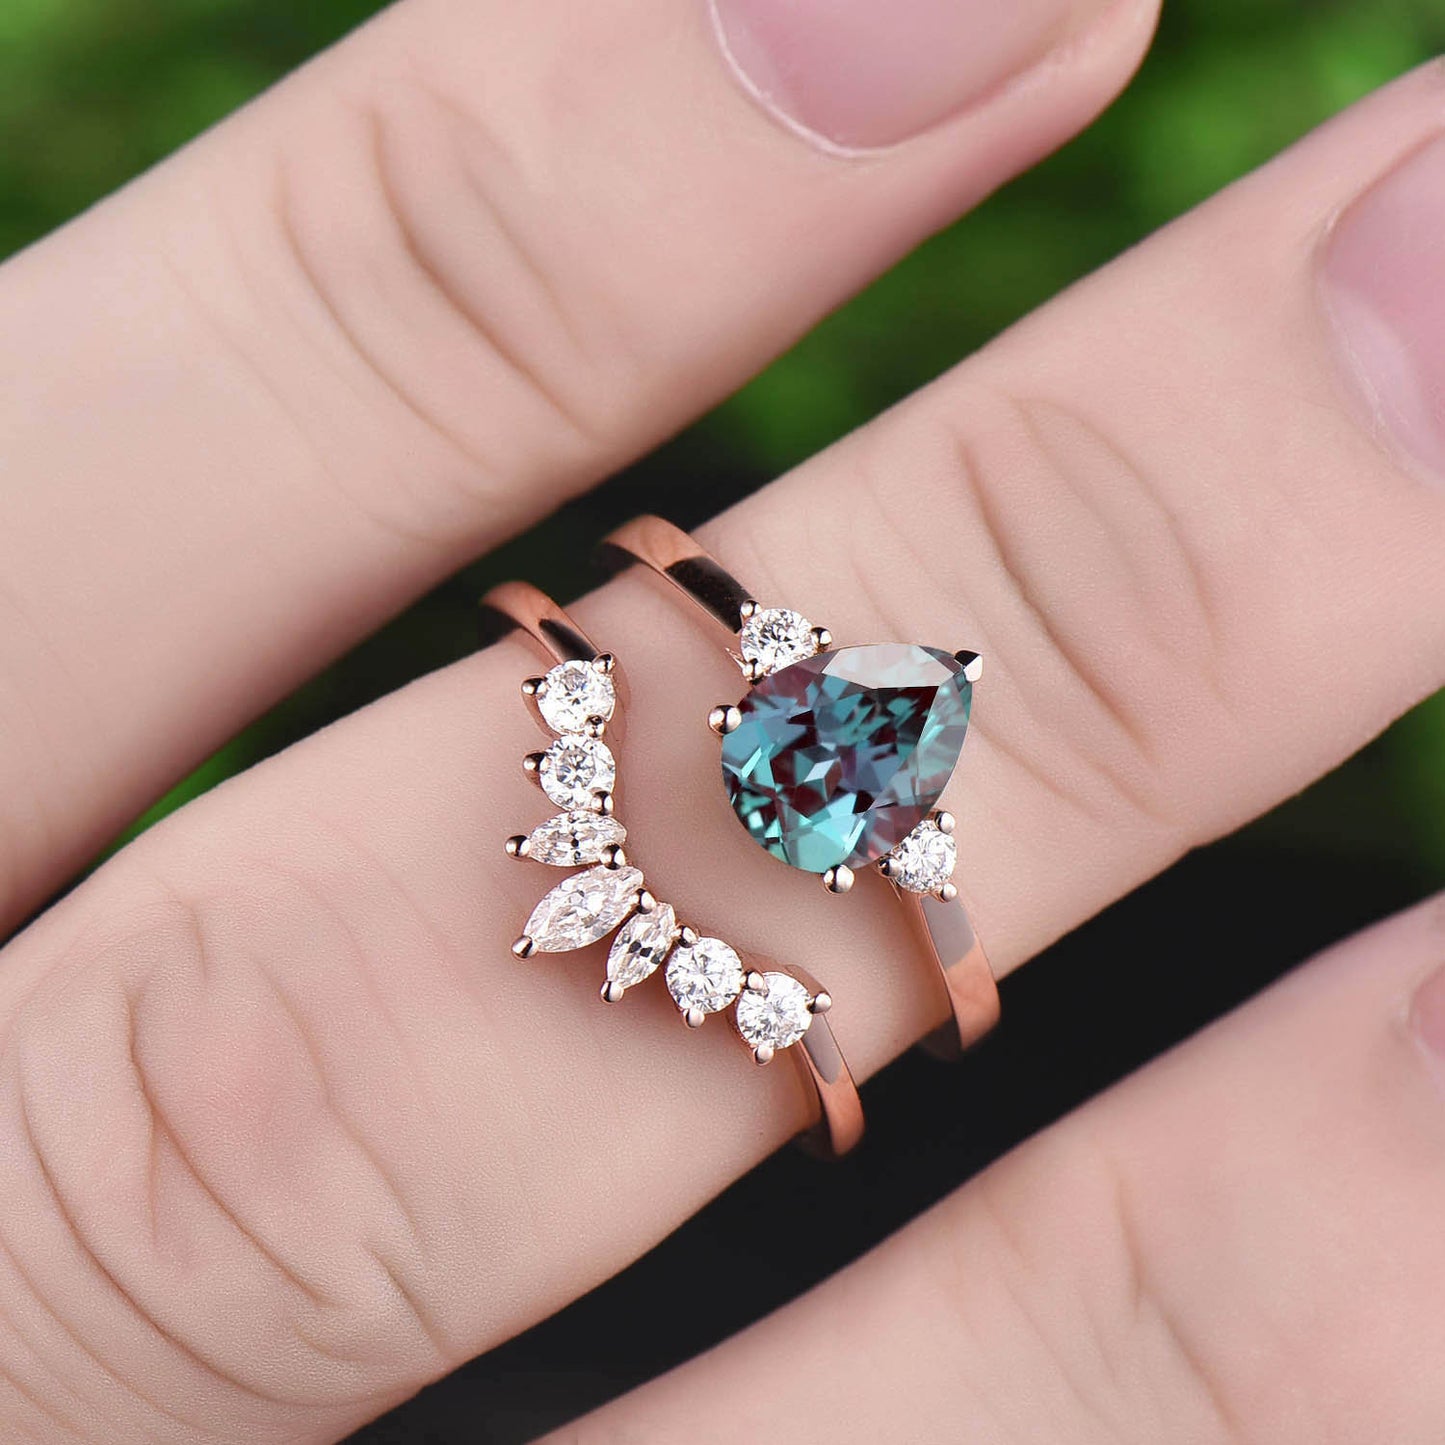 Vintage unique marquise moissanite ring Three stone ring 2pcs pear color change alexandrite engagement ring set rose gold bridal ring set